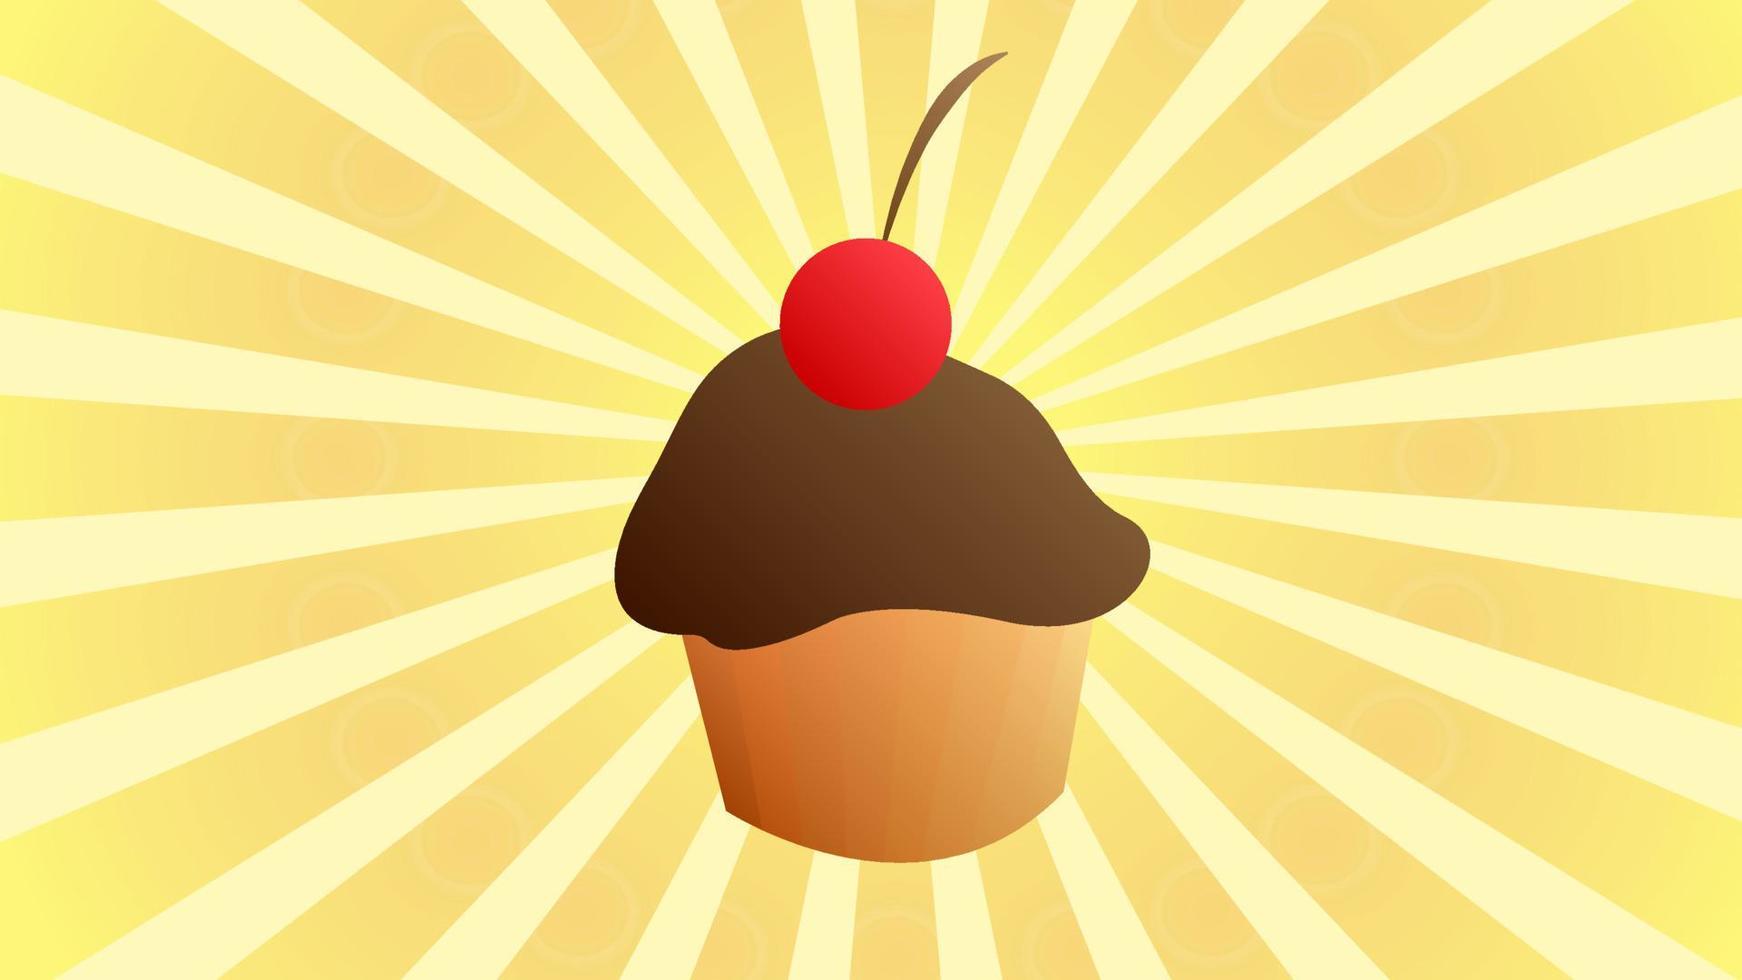 Muffin. Hand drawn vector illustration with muffin and sunburst. Used for poster, banner, web, t-shirt print, bag print, badges, flyer, logo design and more